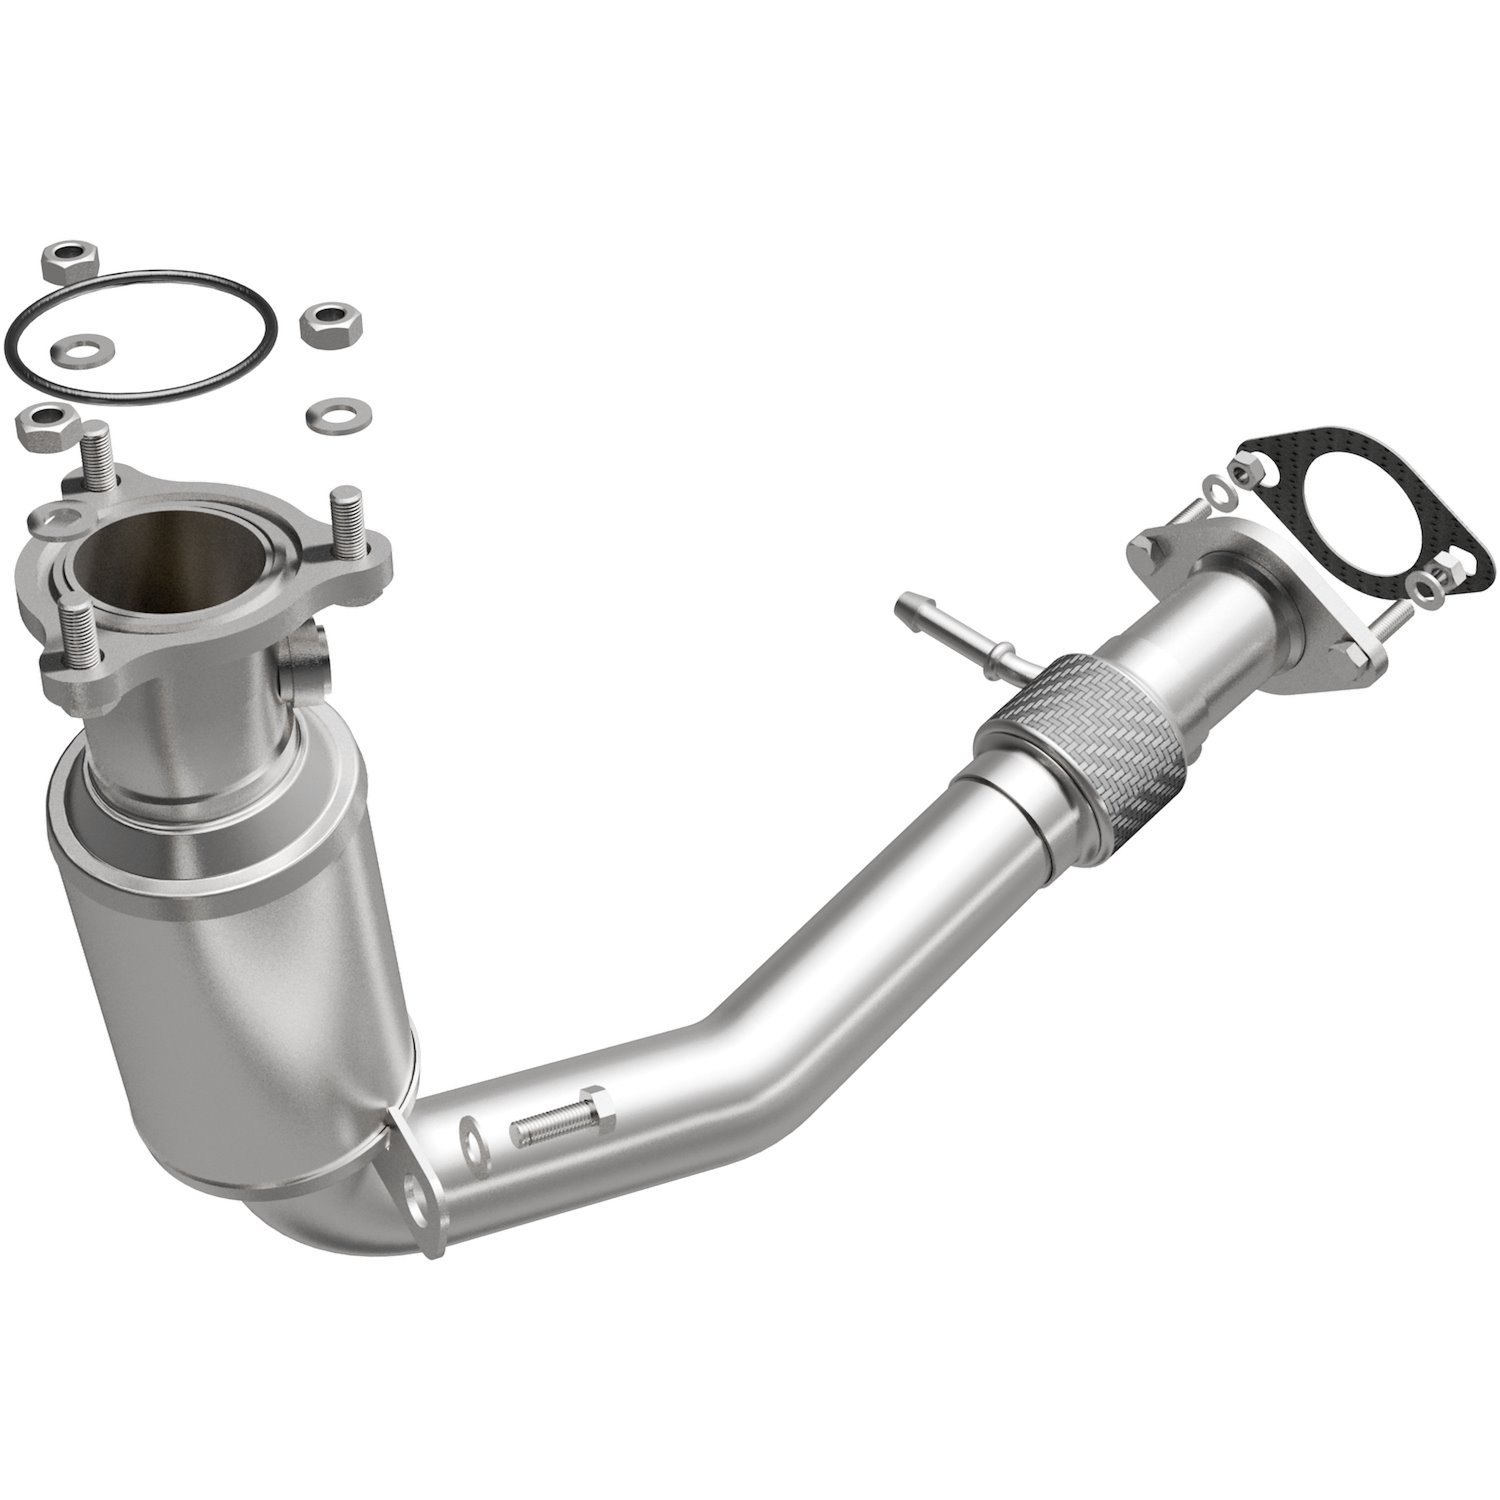 OEM Grade Federal / EPA Compliant Direct-Fit Catalytic Converter 52186